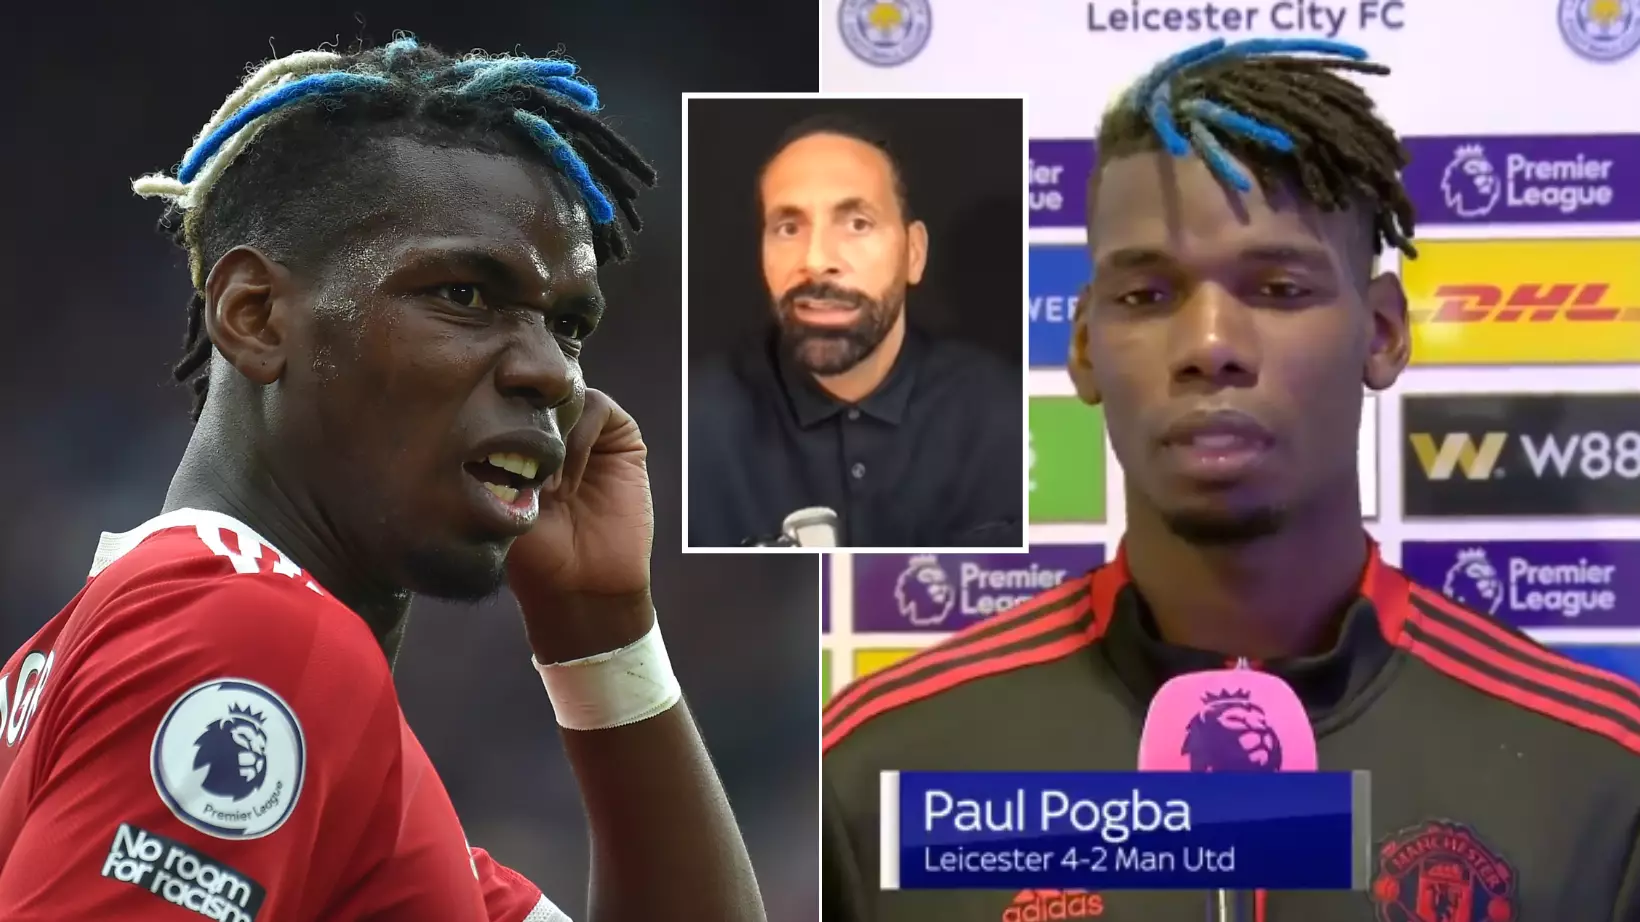 Rio Ferdinand Angered At Paul Pogba's 'We Deserved To Lose' Claim After Leicester City Defeat